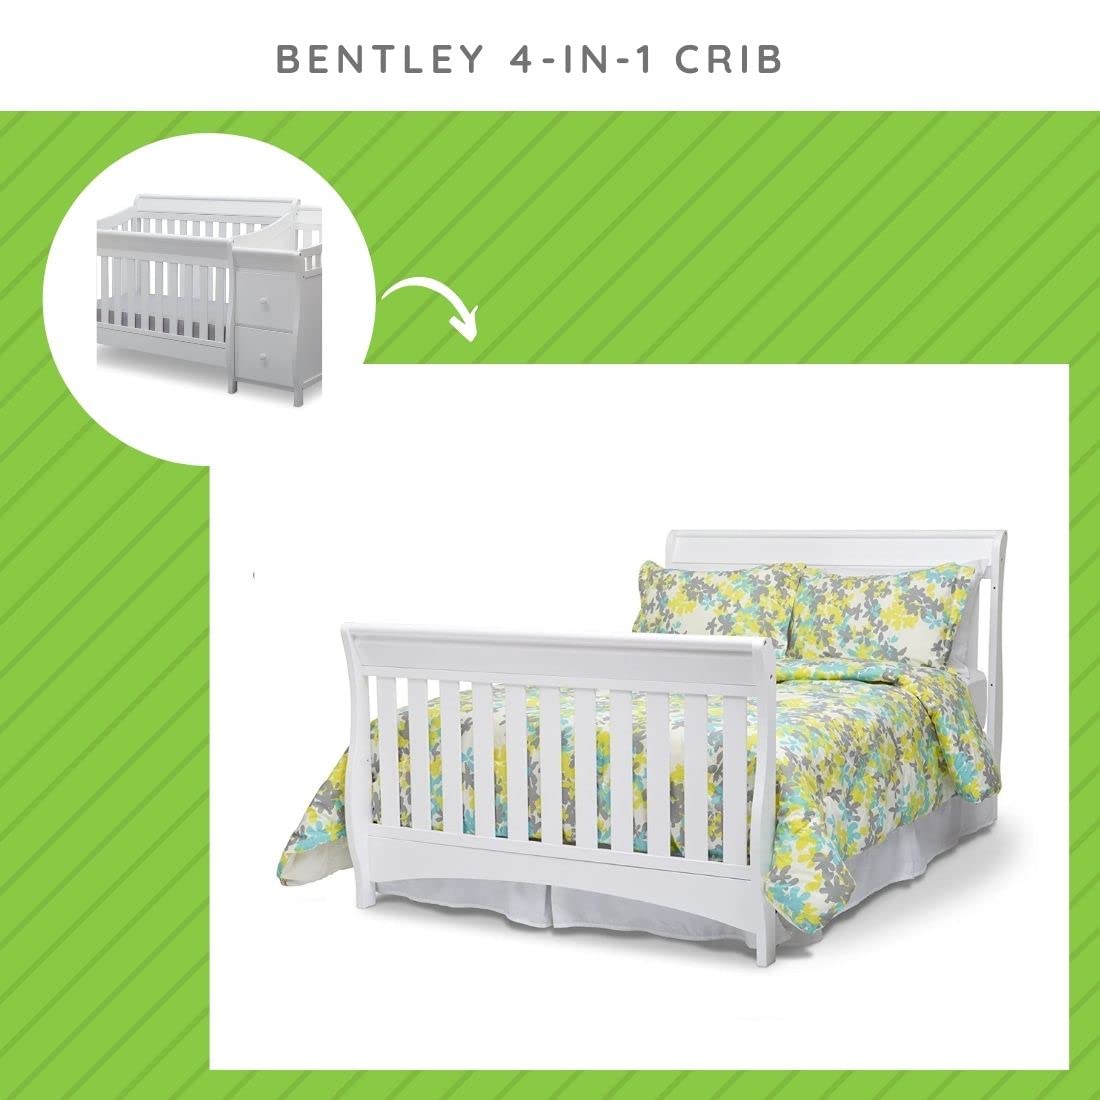 Full Size Conversion Kit Bed Rails for Bentley Crib by Delta Children - #0050 (Bianca White - 130)